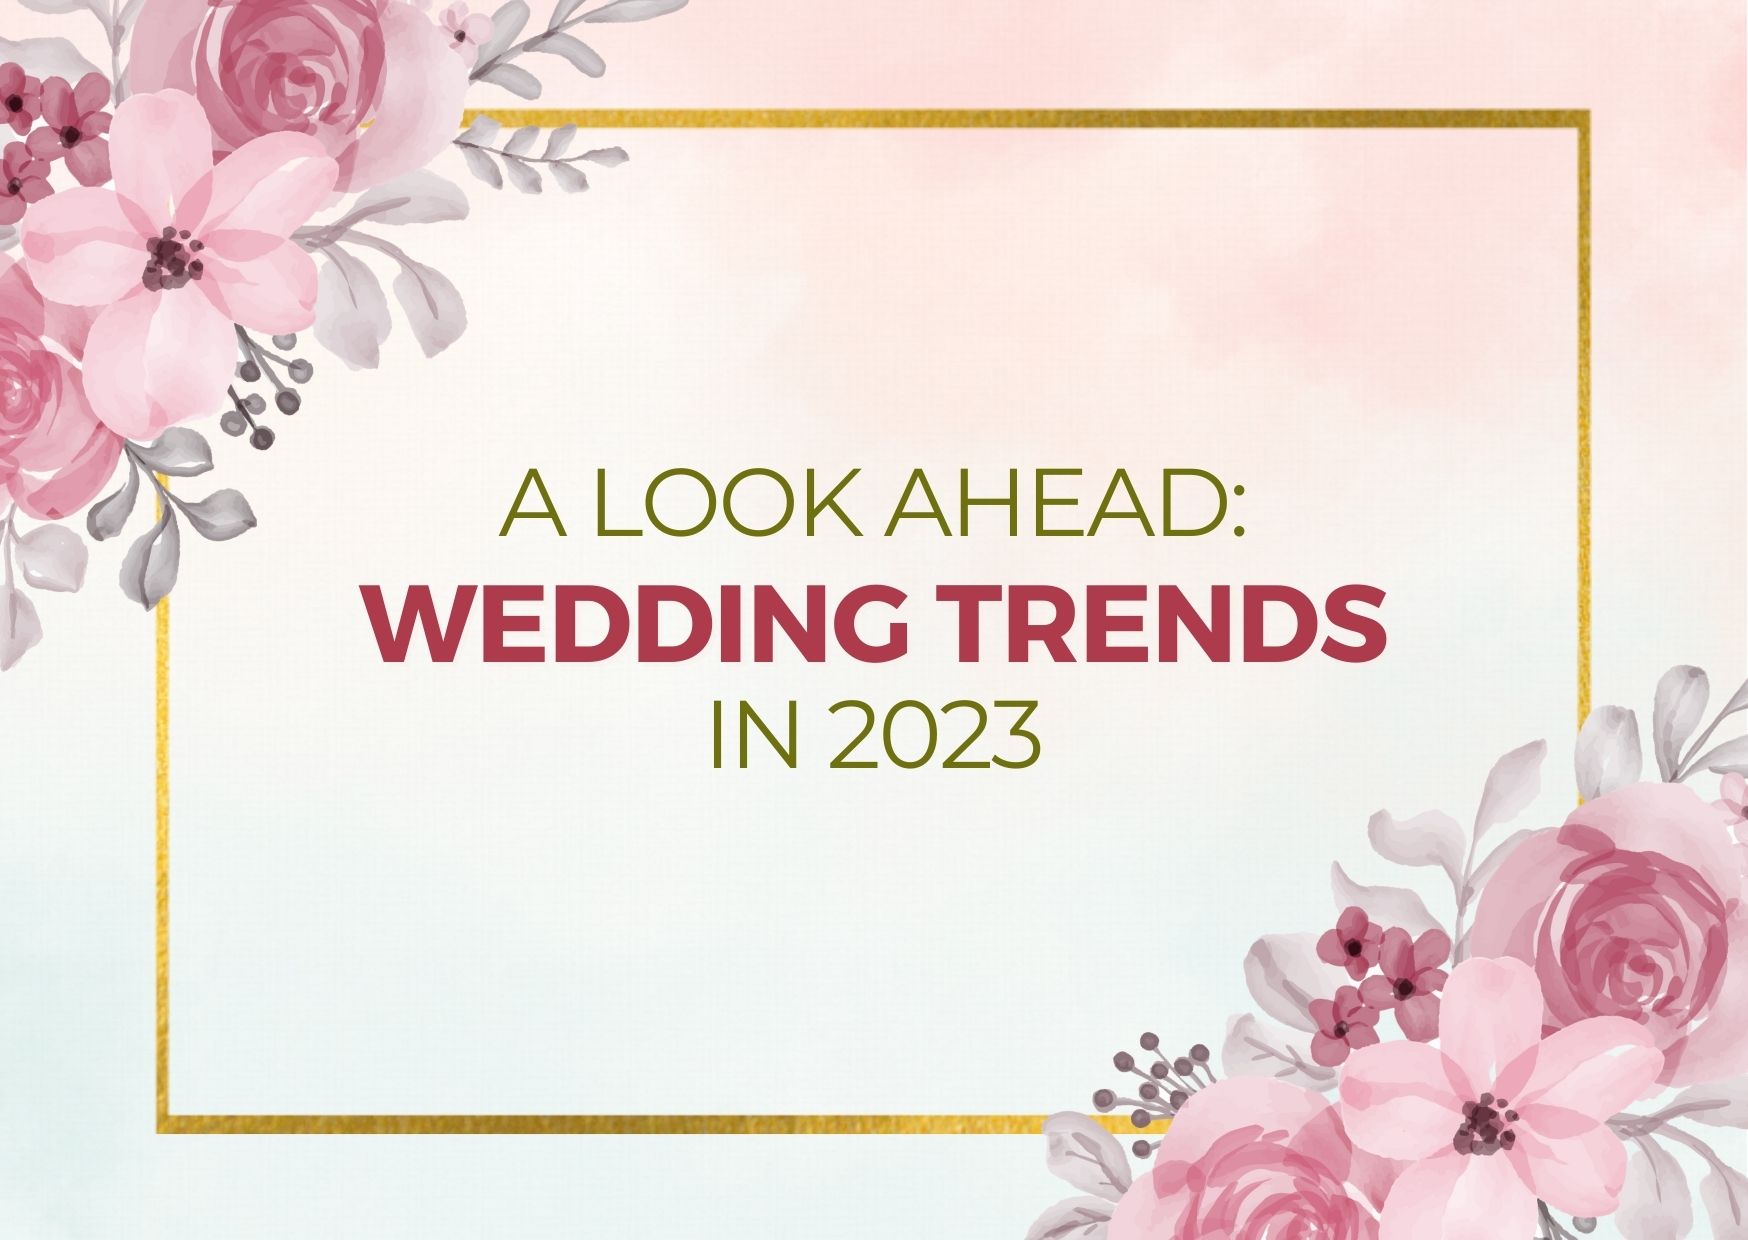 A Look Ahead: Wedding Trends for 2023